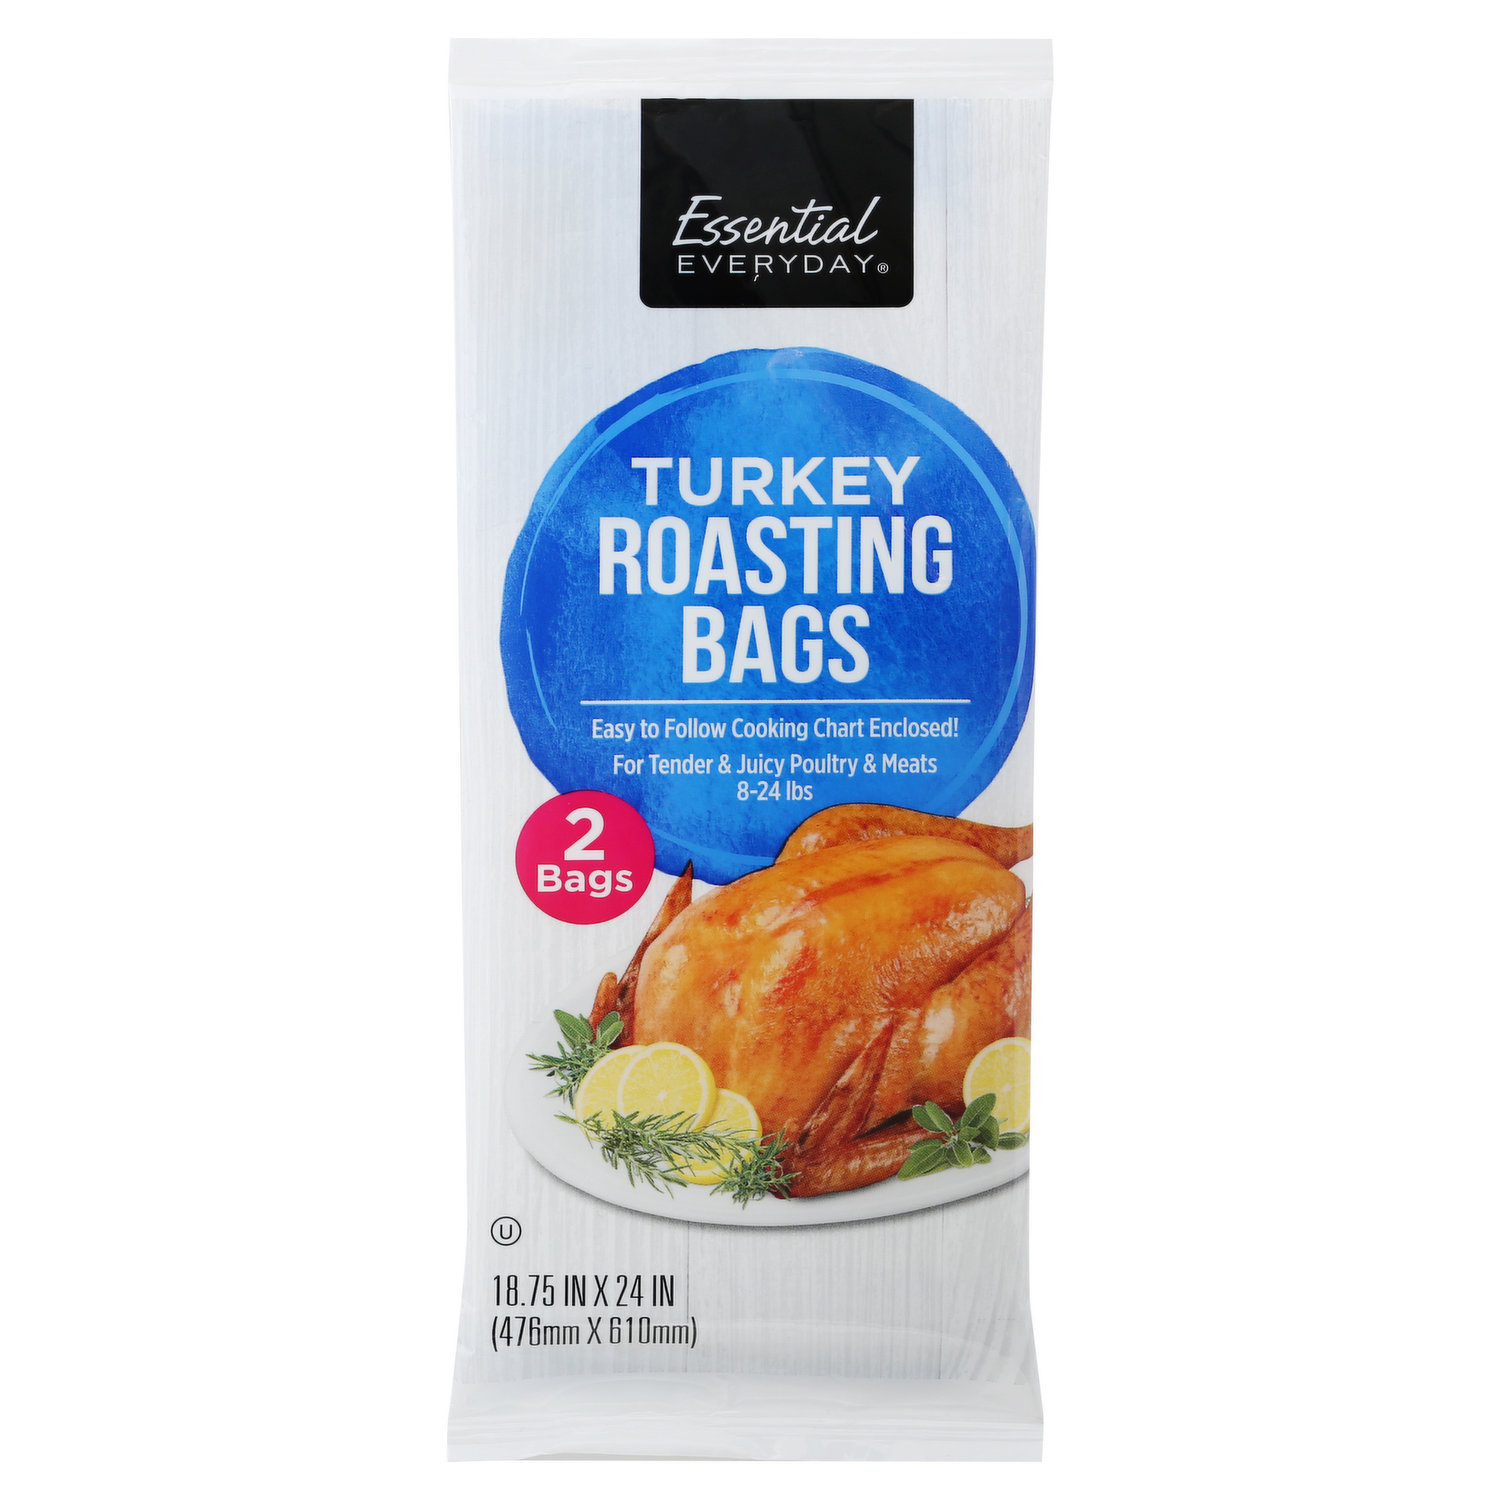 How To Use PanSaver® Oven Roasting Bags - Pansaver